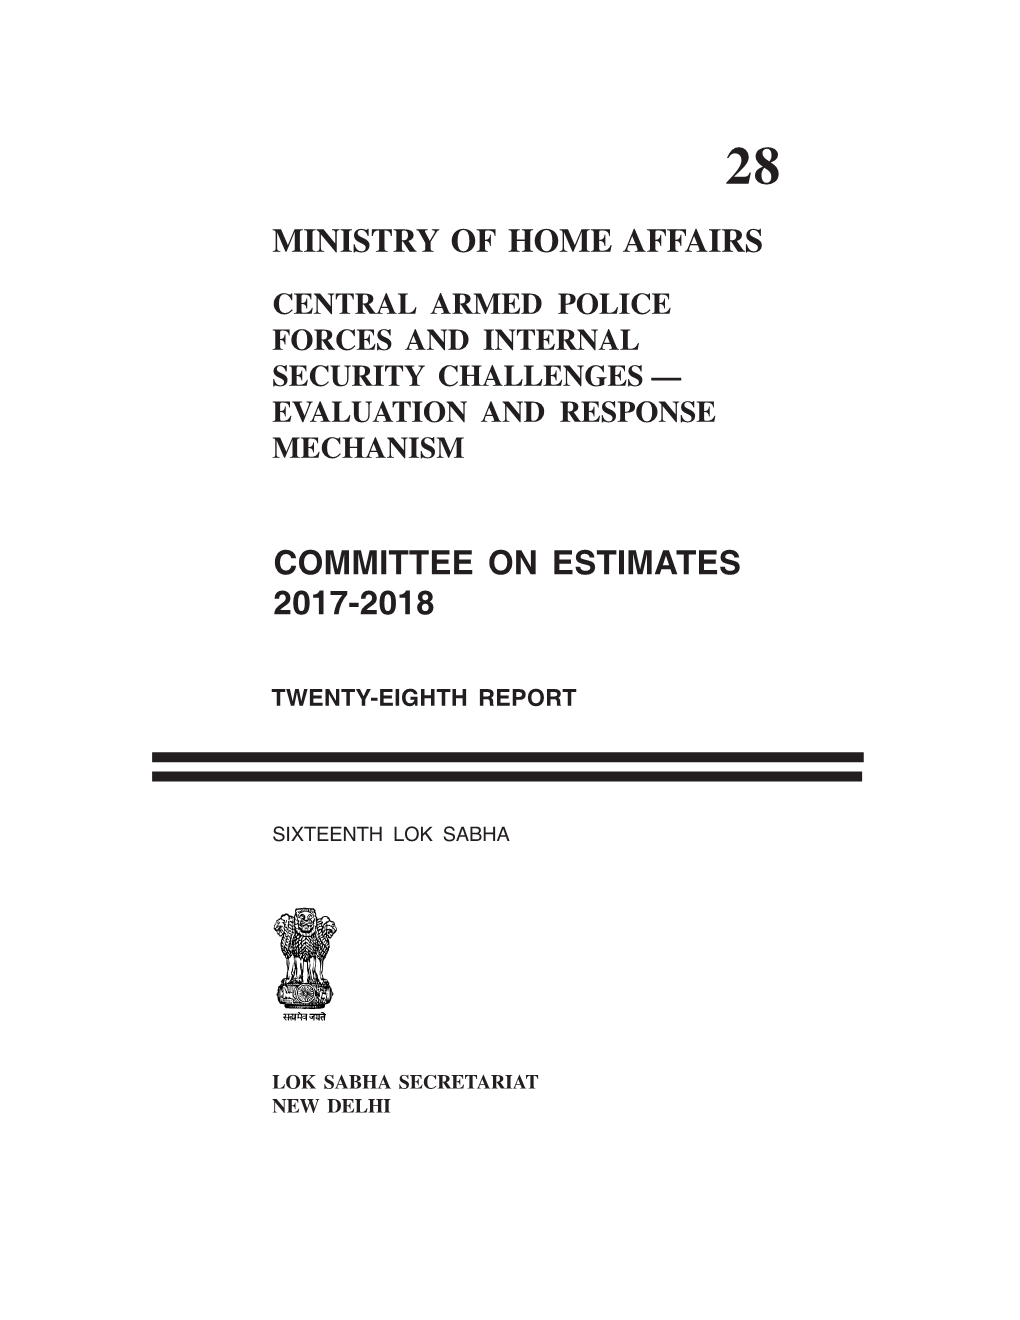 Ministry of Home Affairs Committee on Estimates 2017